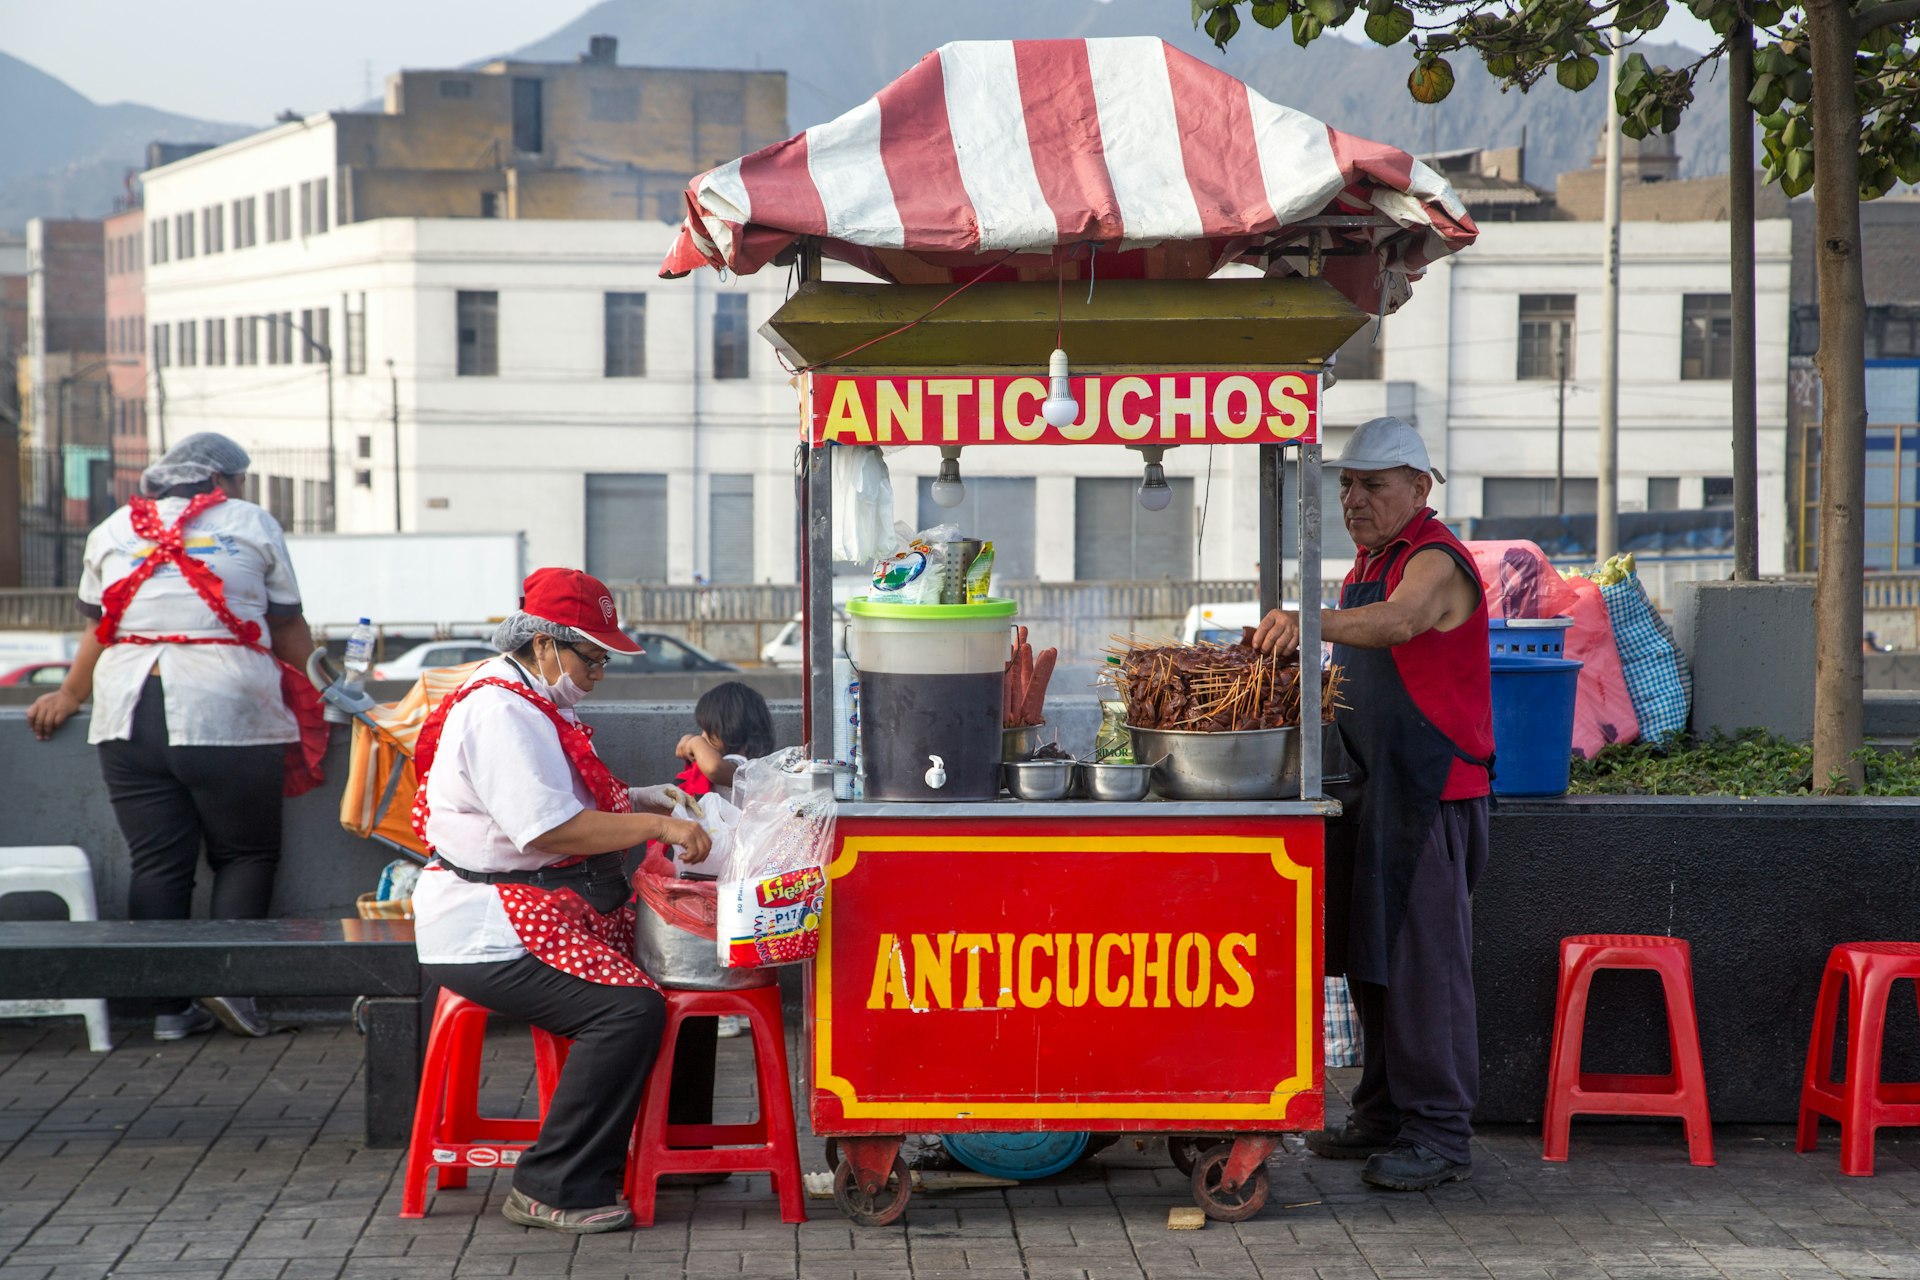 A food cart selling anticuchos in the city center of Lima, Peru